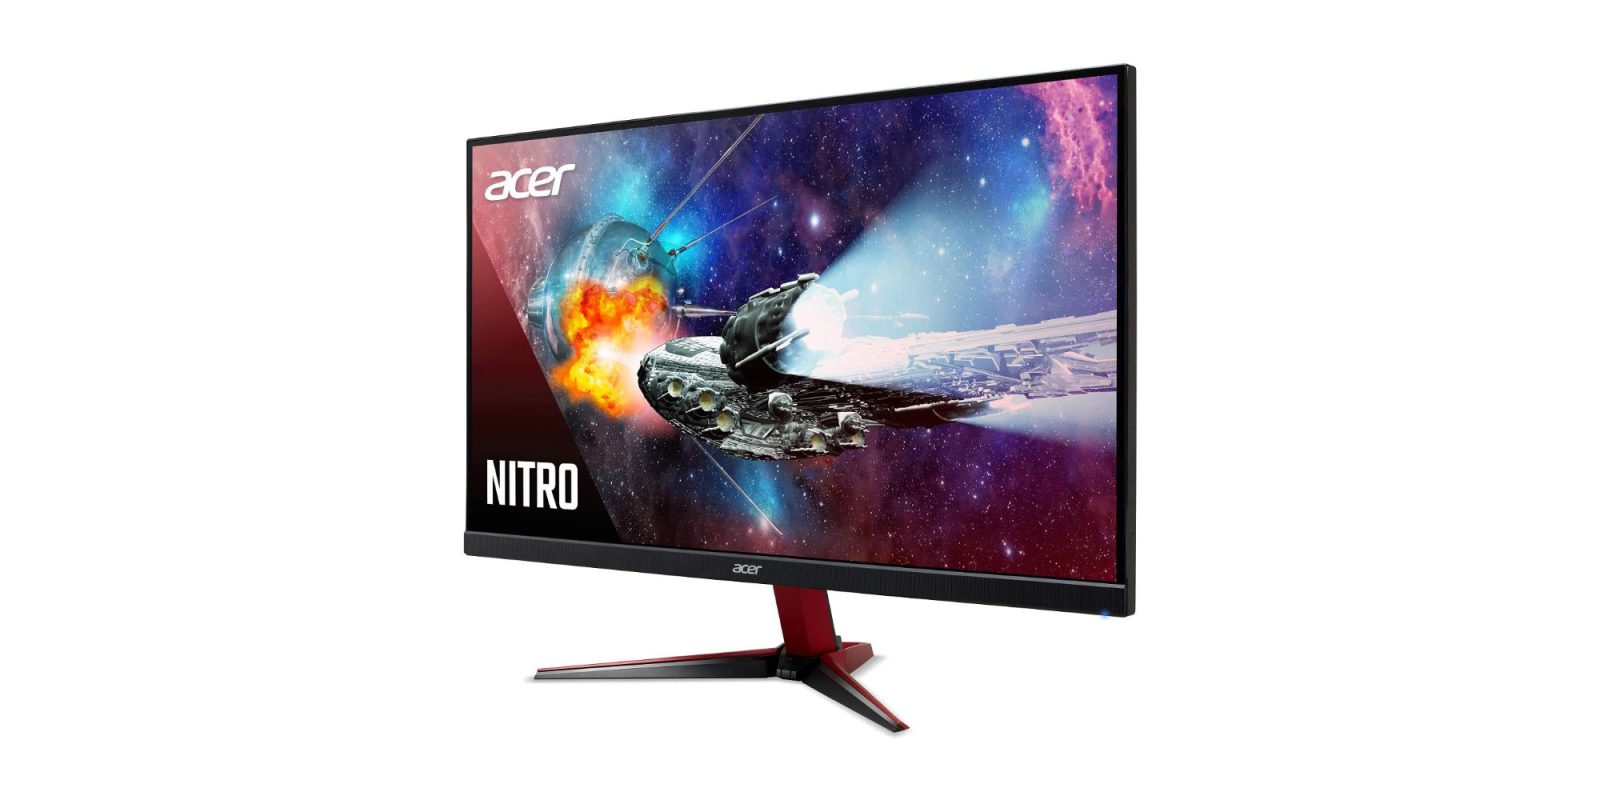 Acer S 27 Inch 240hz 1080p Display Hits Low Of 310 Reg 450 More From 73 9to5toys